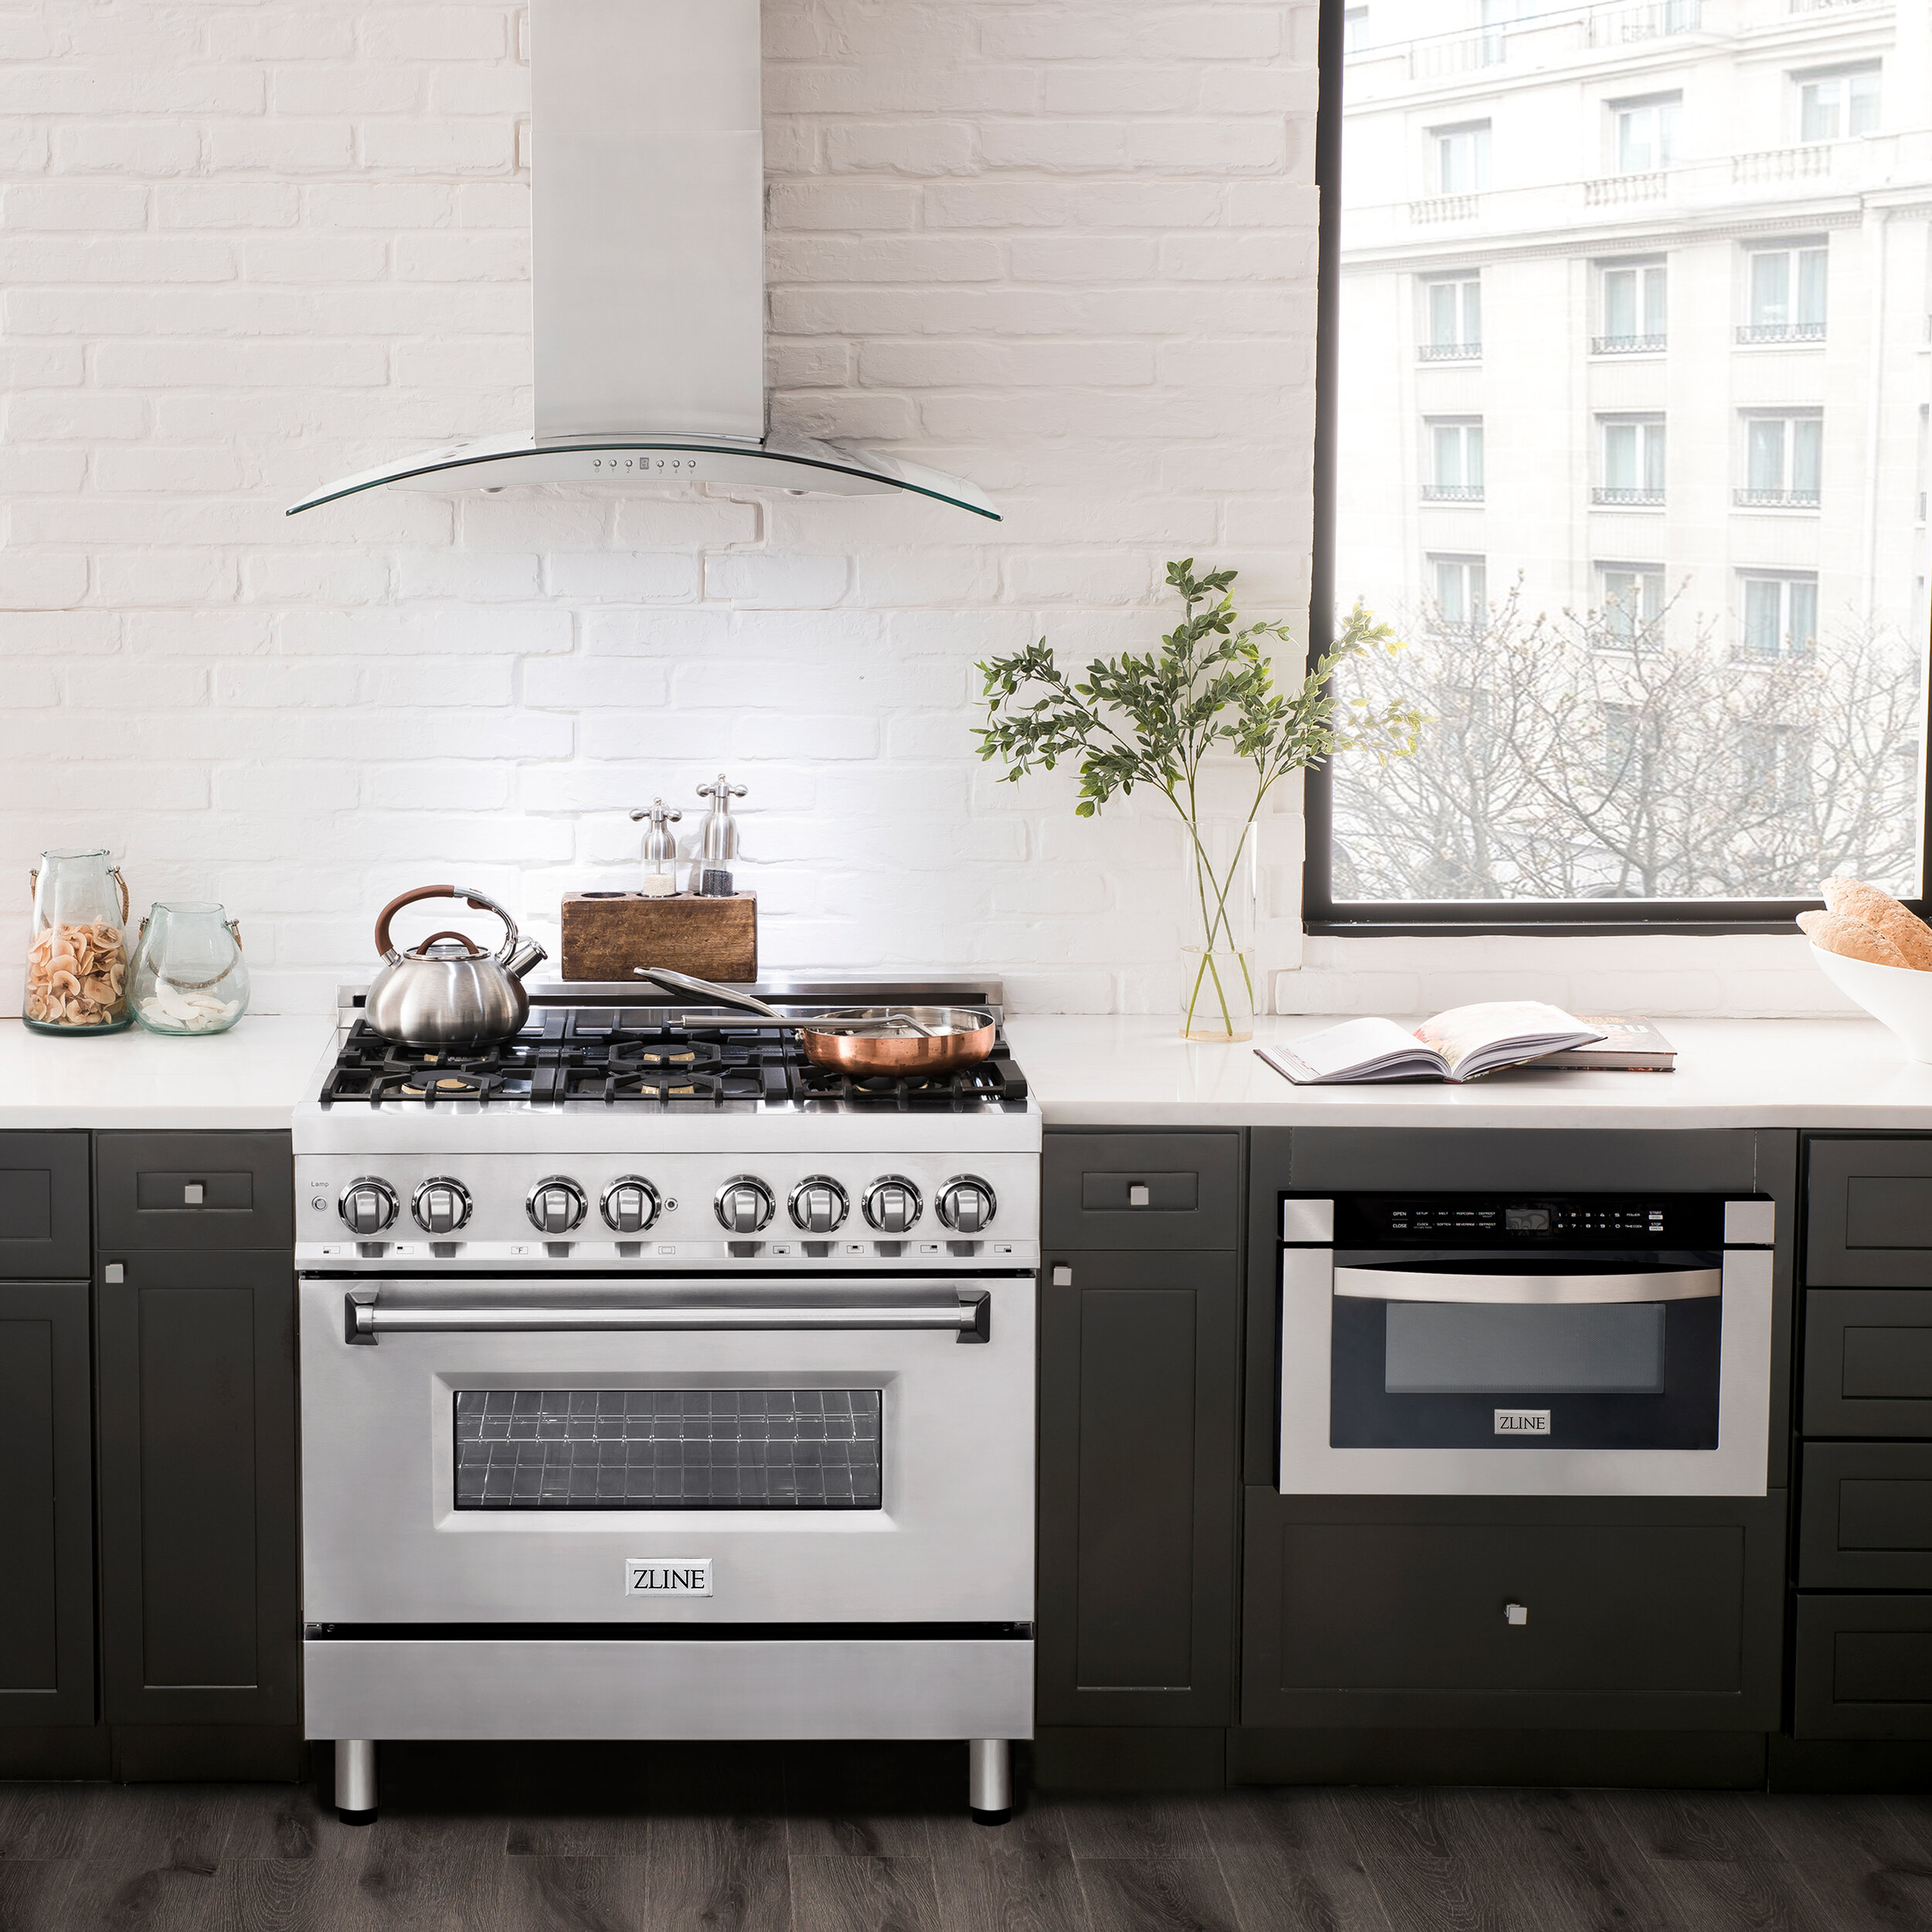 Upgrade Your Cooking Experience With a Zline Gas Range